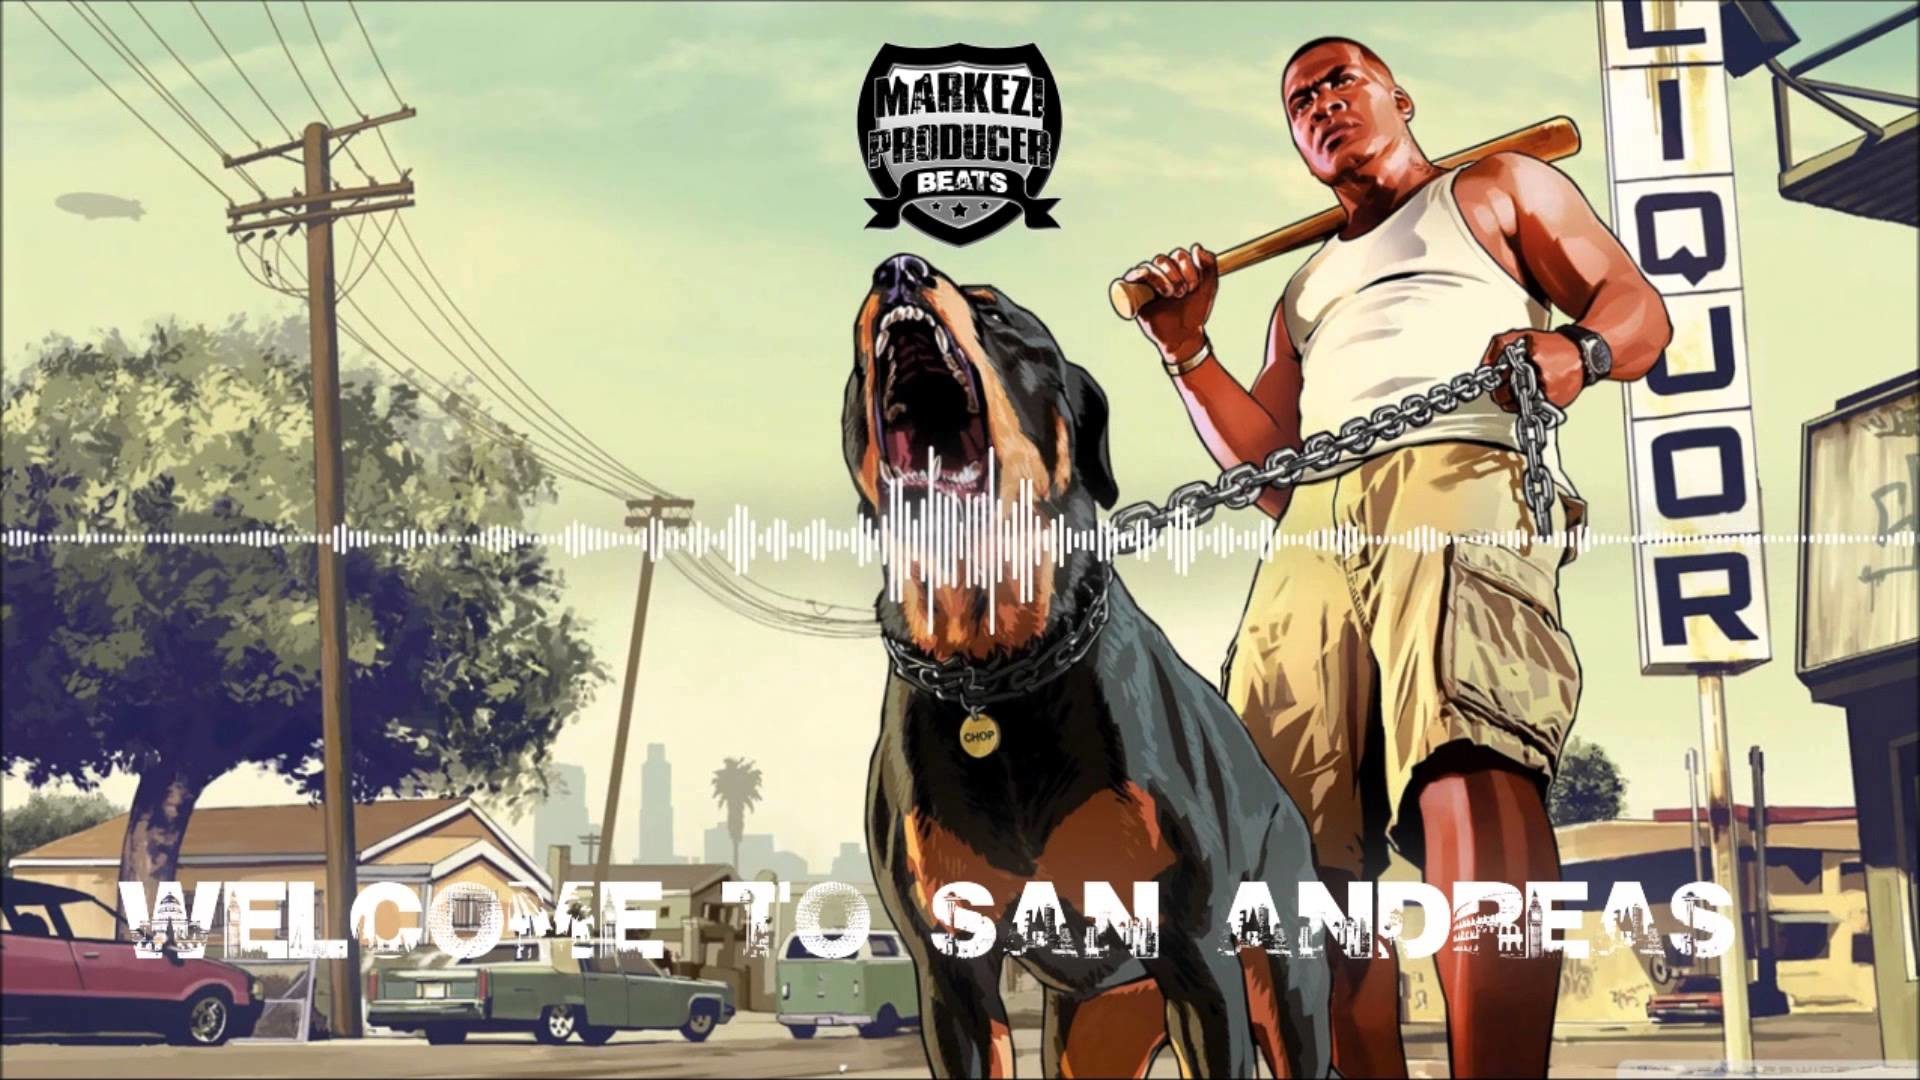 Epic West Coast / Hip Hop Type Beat [ WELCOME TO SAN ANDREAS ]